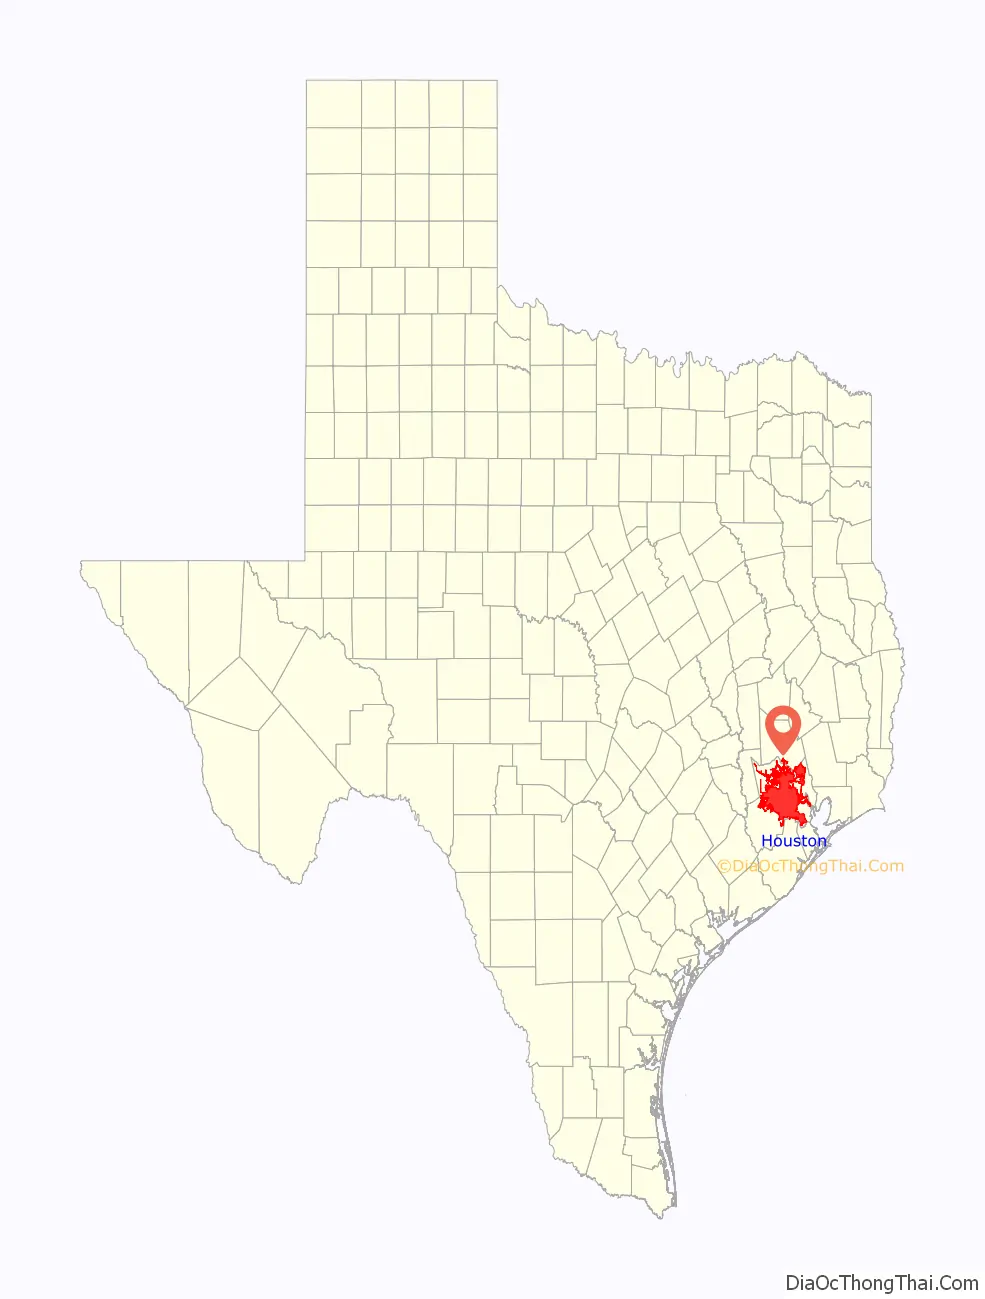 Houston location on the Texas map. Where is Houston city.